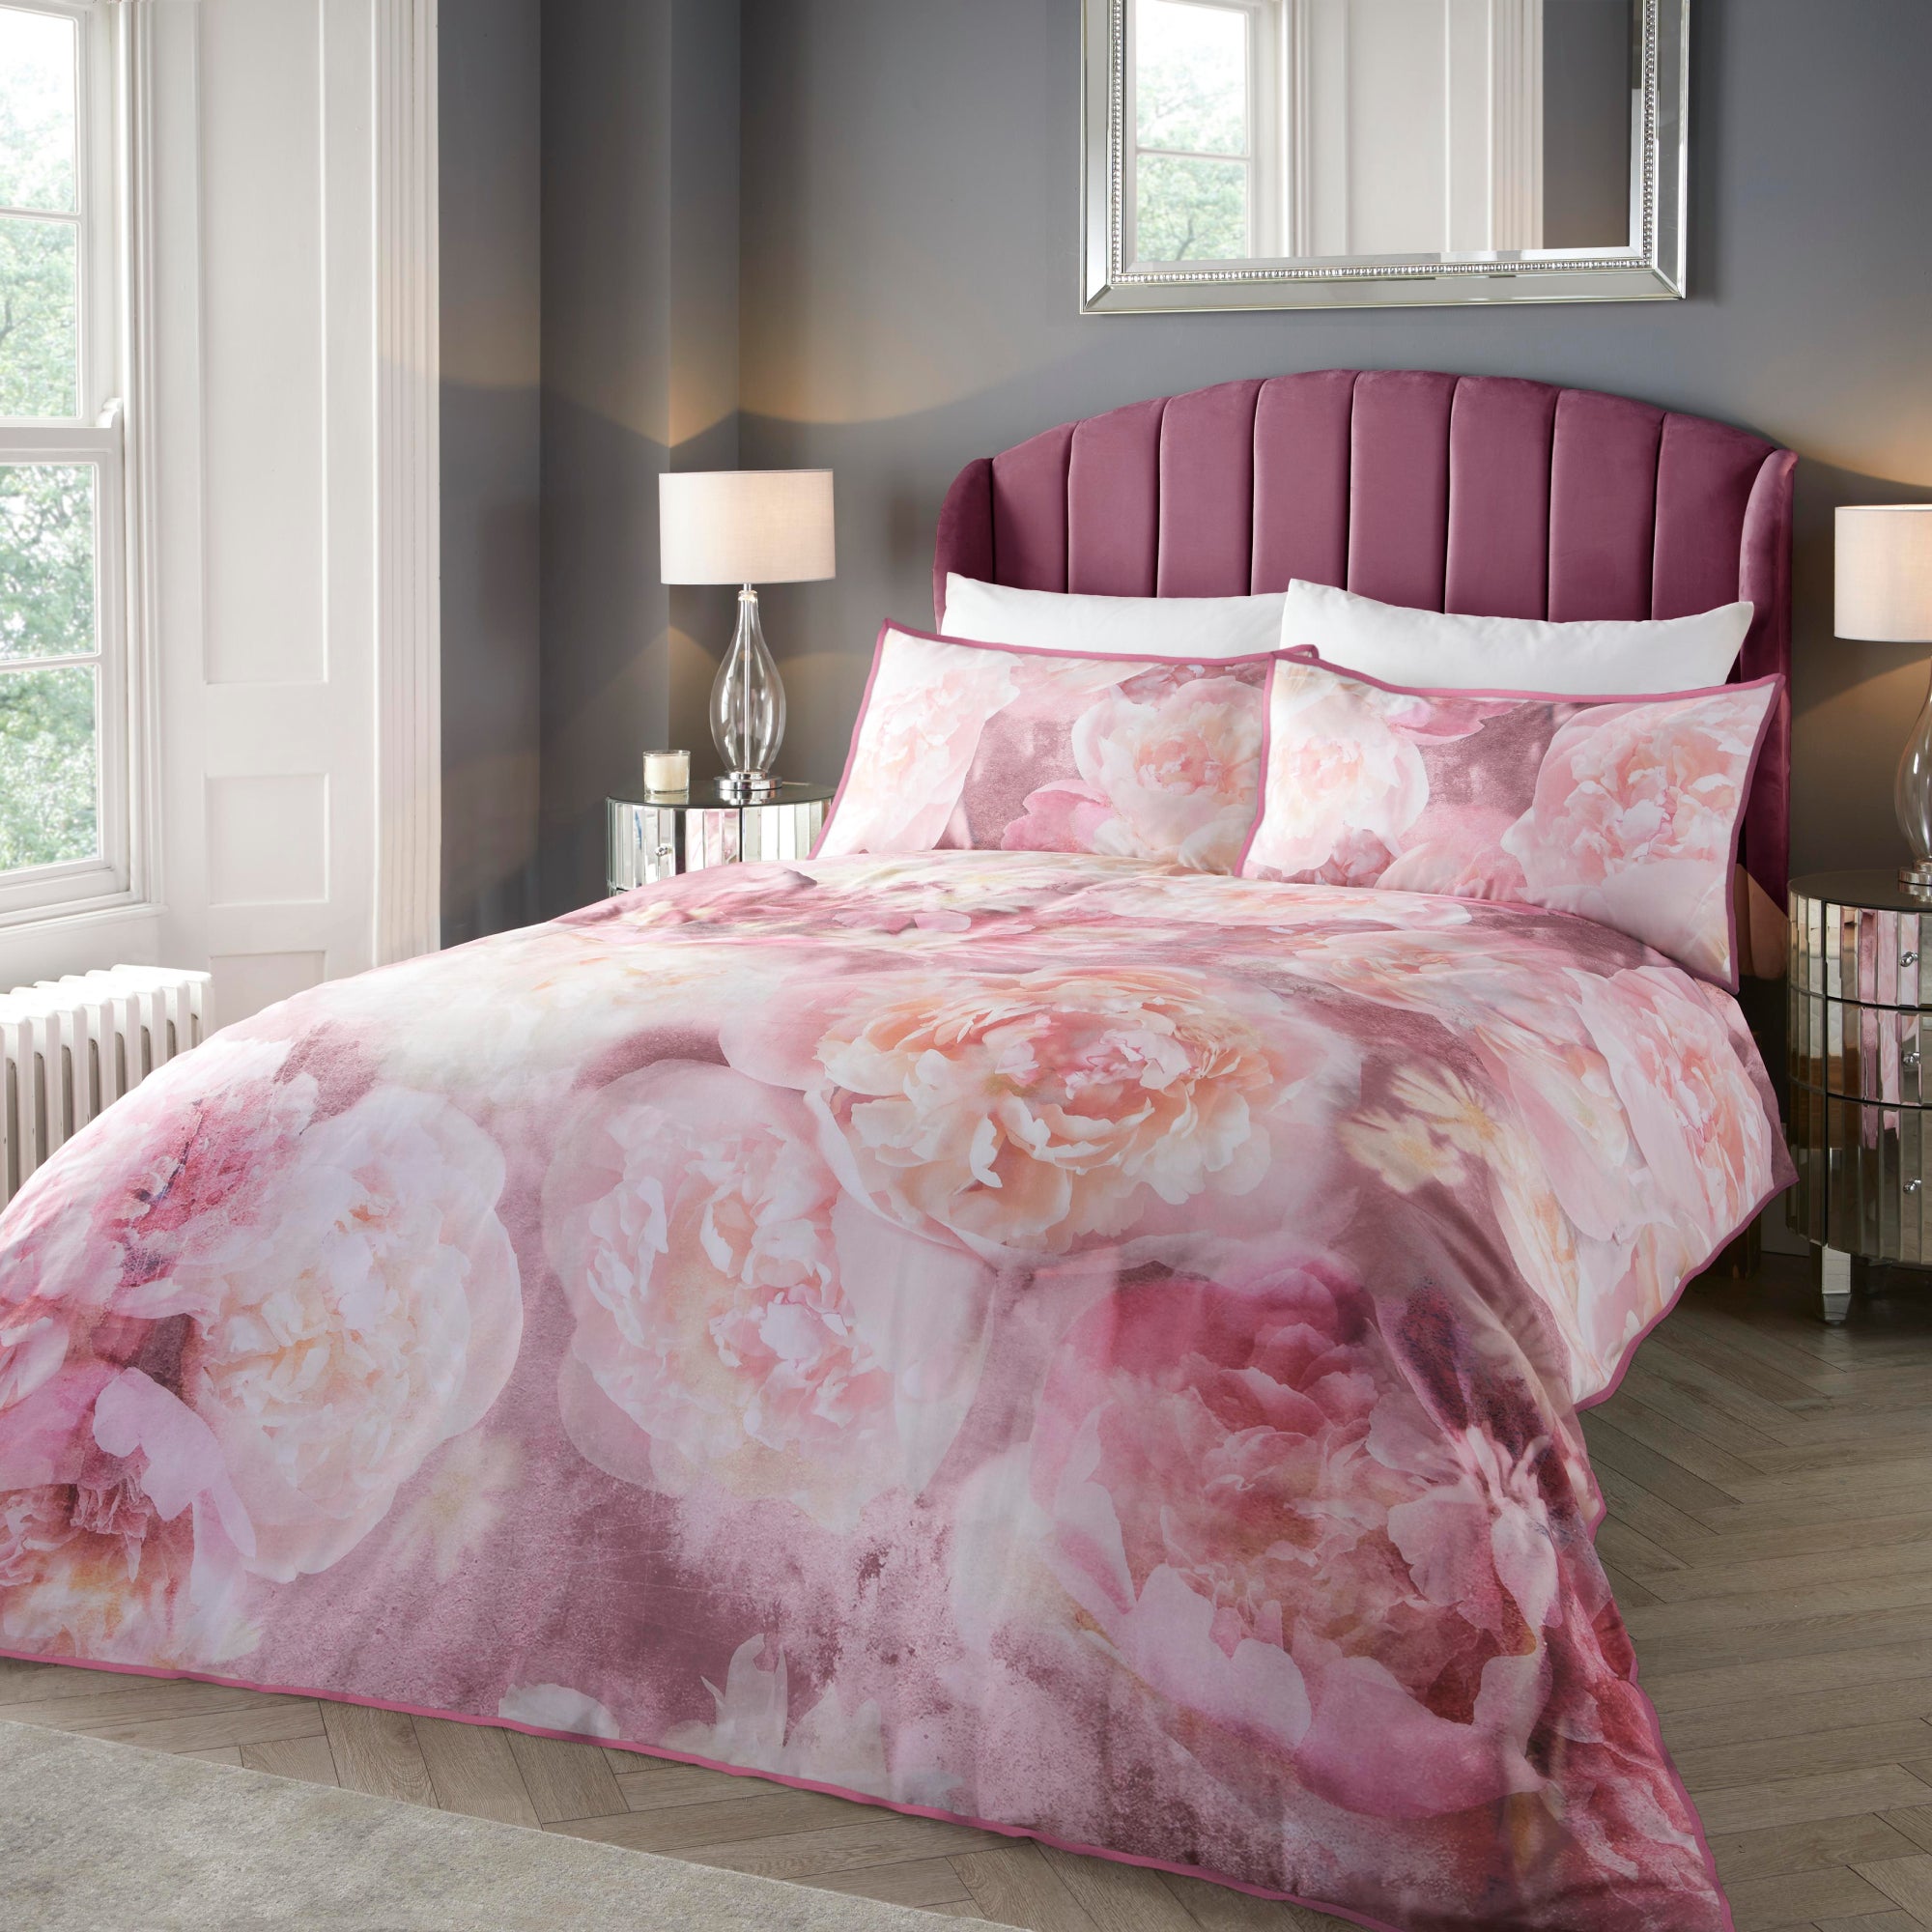 Soiree Rose Bloom Pink Duvet Cover And Pillowcase Set Pink